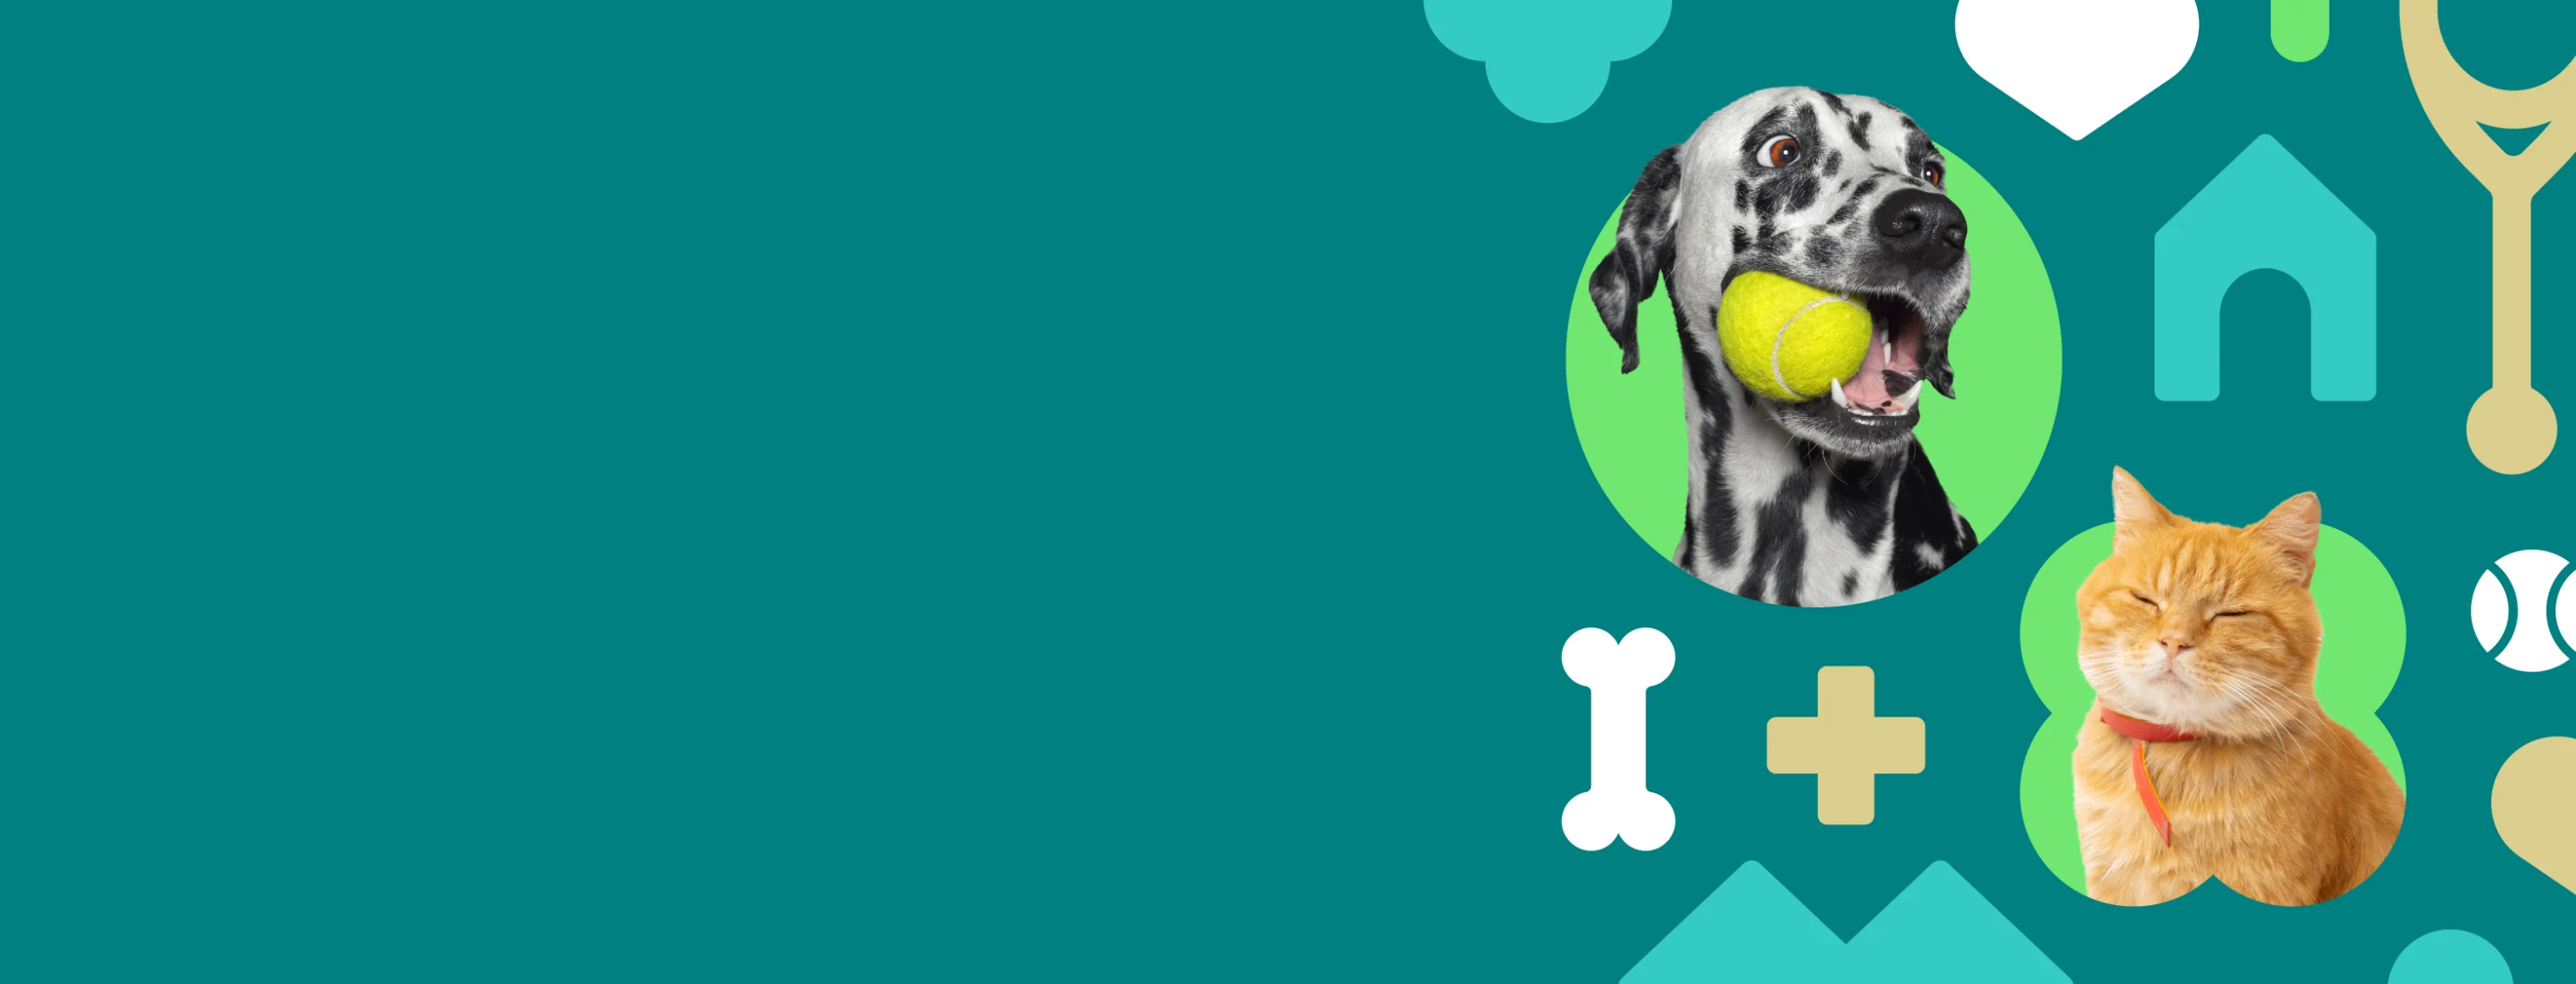 Cat and dog with tennis ball with a teal background and pet vet icons